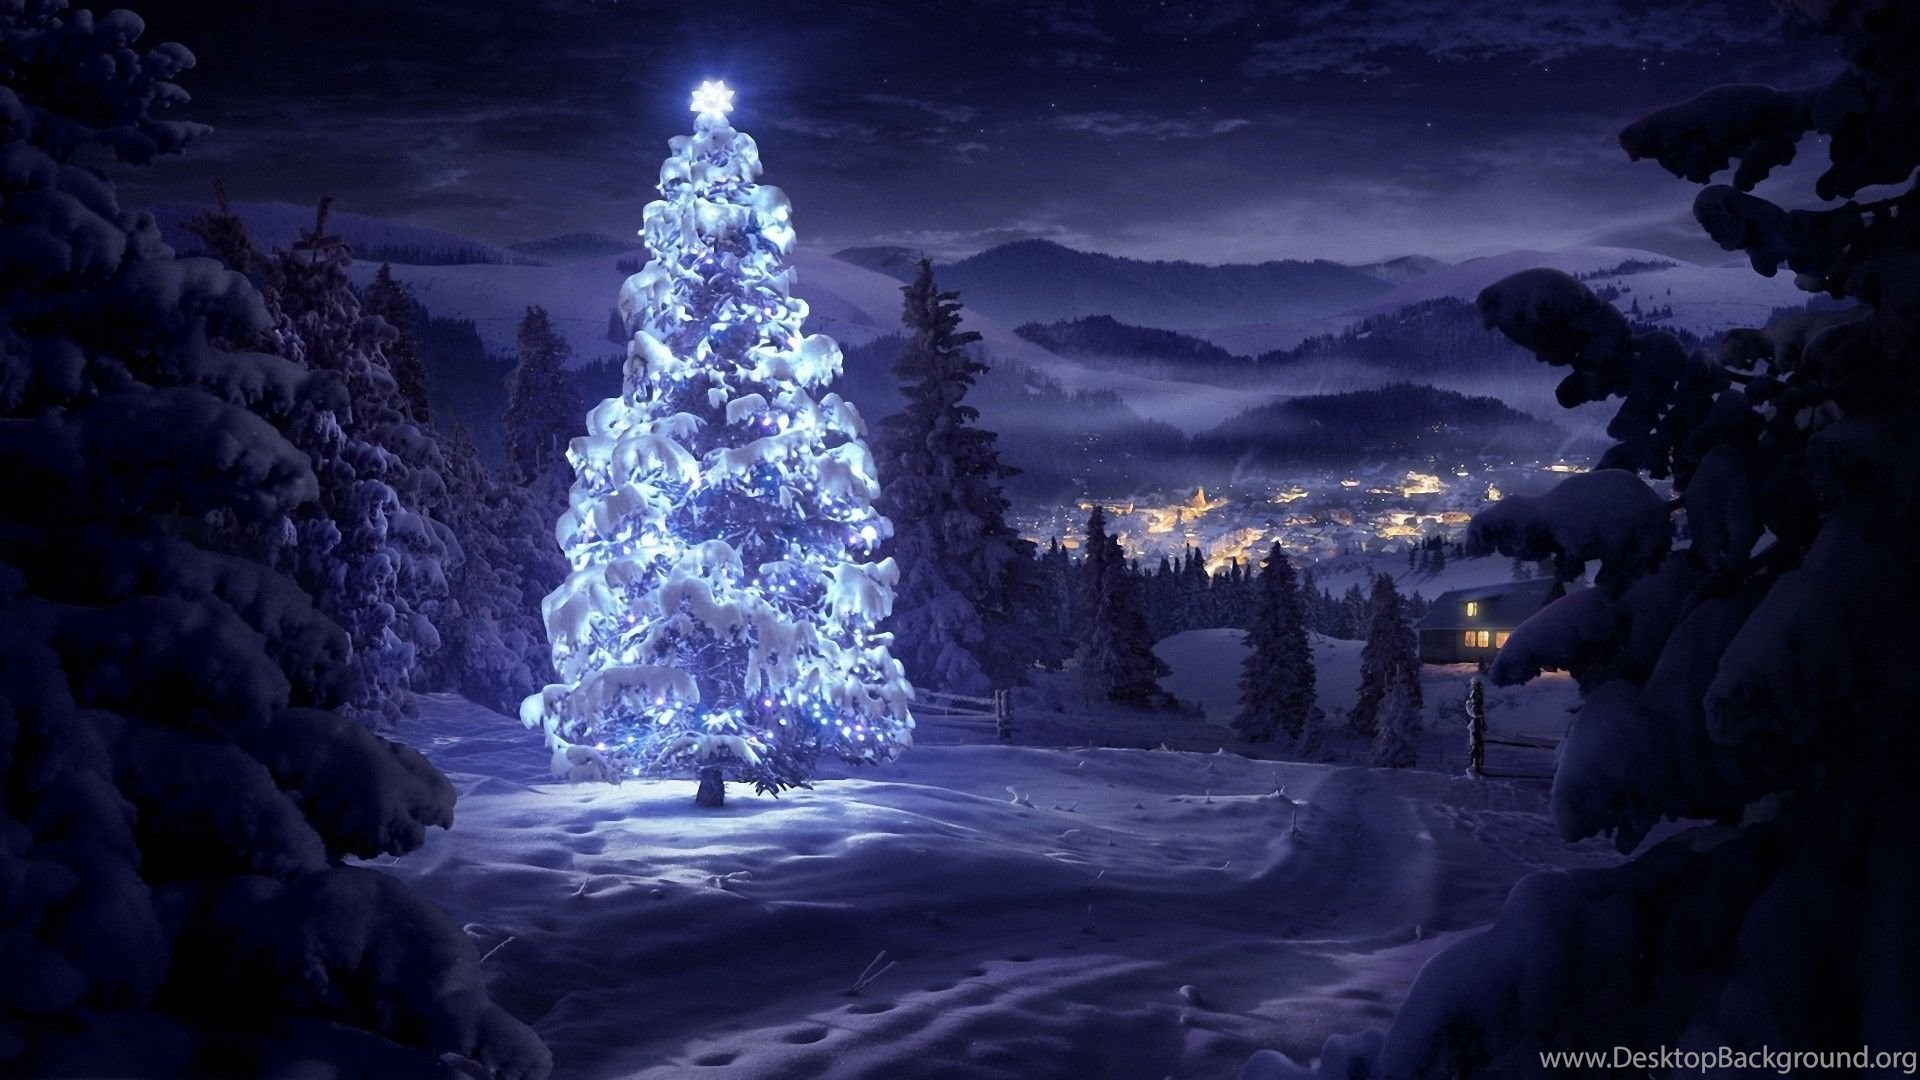 Christmas Tree In The Snow, Winter, Forest, Decoration, Holidays. Desktop Background